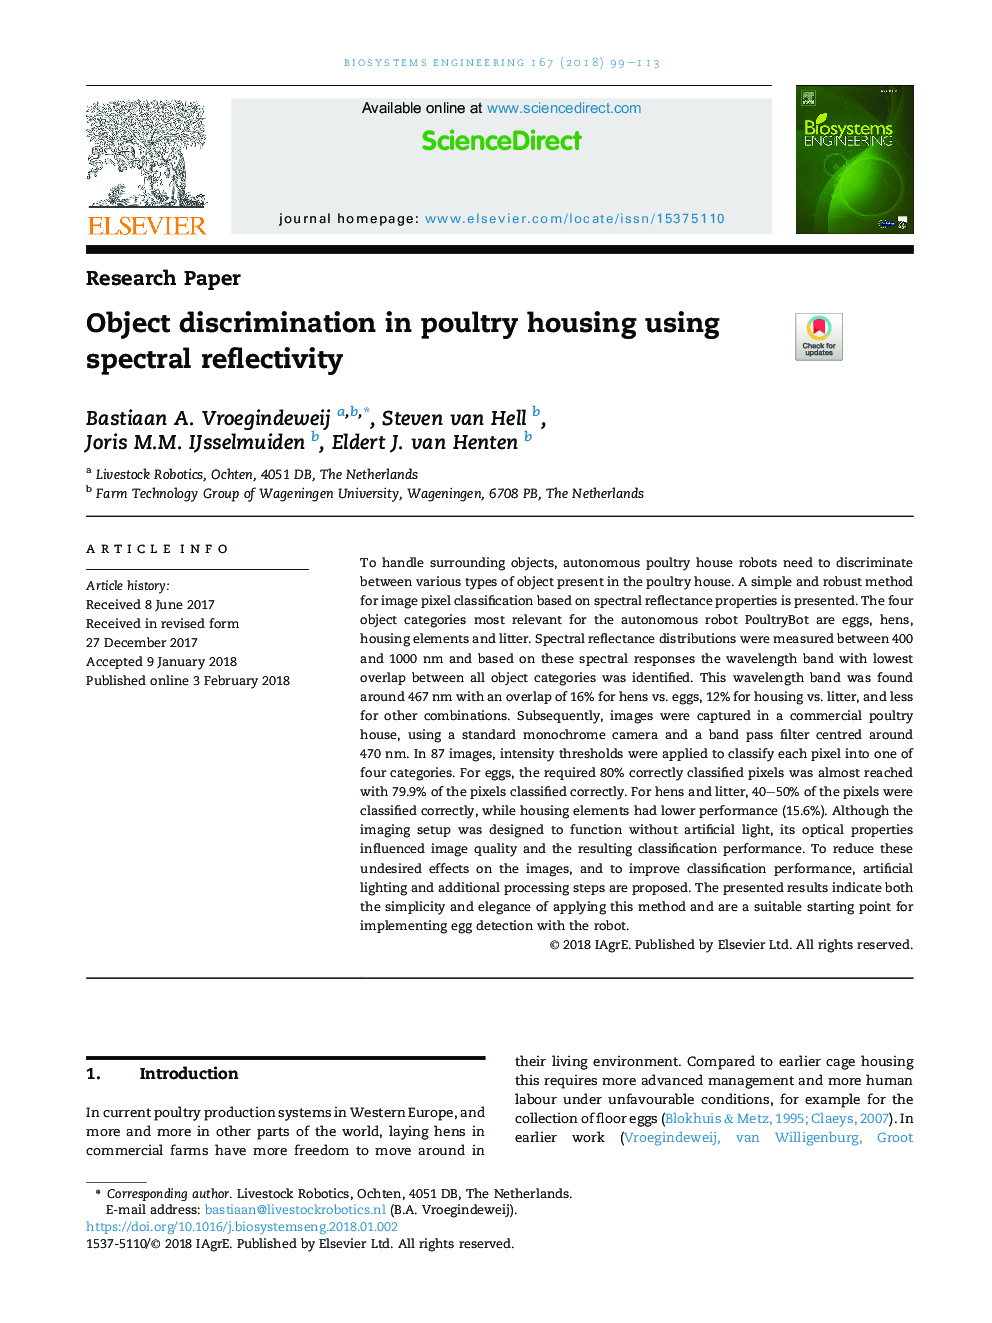 Object discrimination in poultry housing using spectral reflectivity